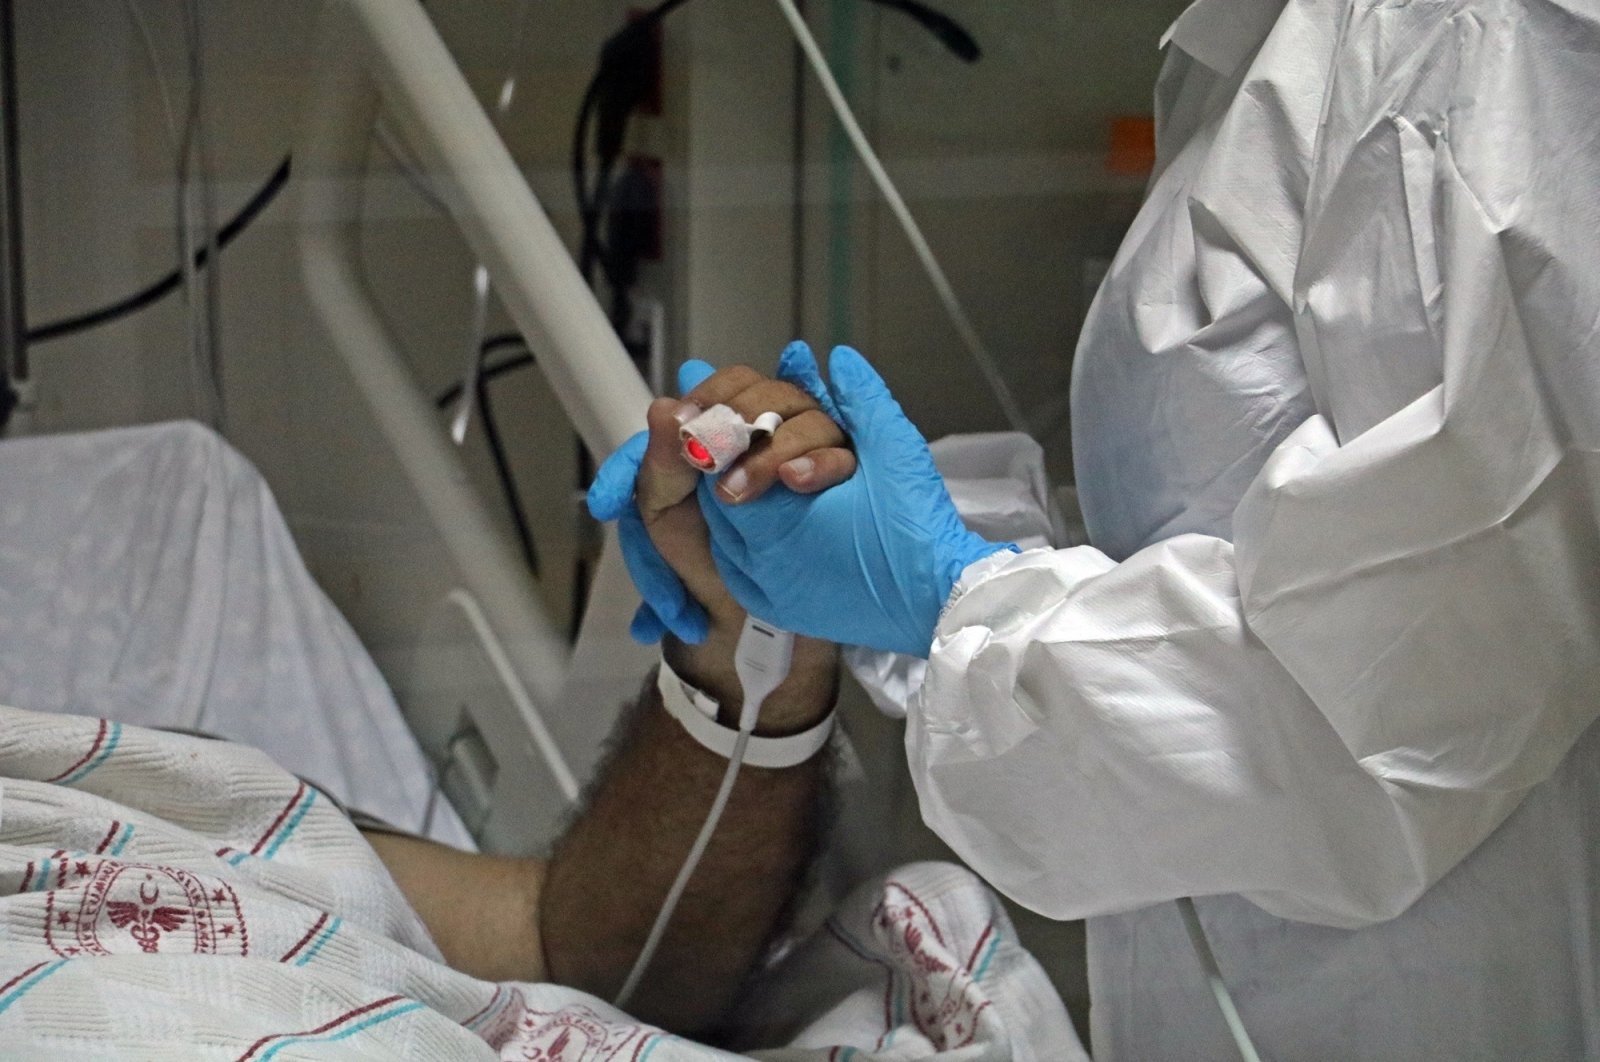 Dr. Ayça Gümüş holds her patient's hand in the intensive care unit at the Kepez Public Hospital in the southern Turkish province of Antalya on Sunday, Oct. 4, 2020 (IHA Photo)